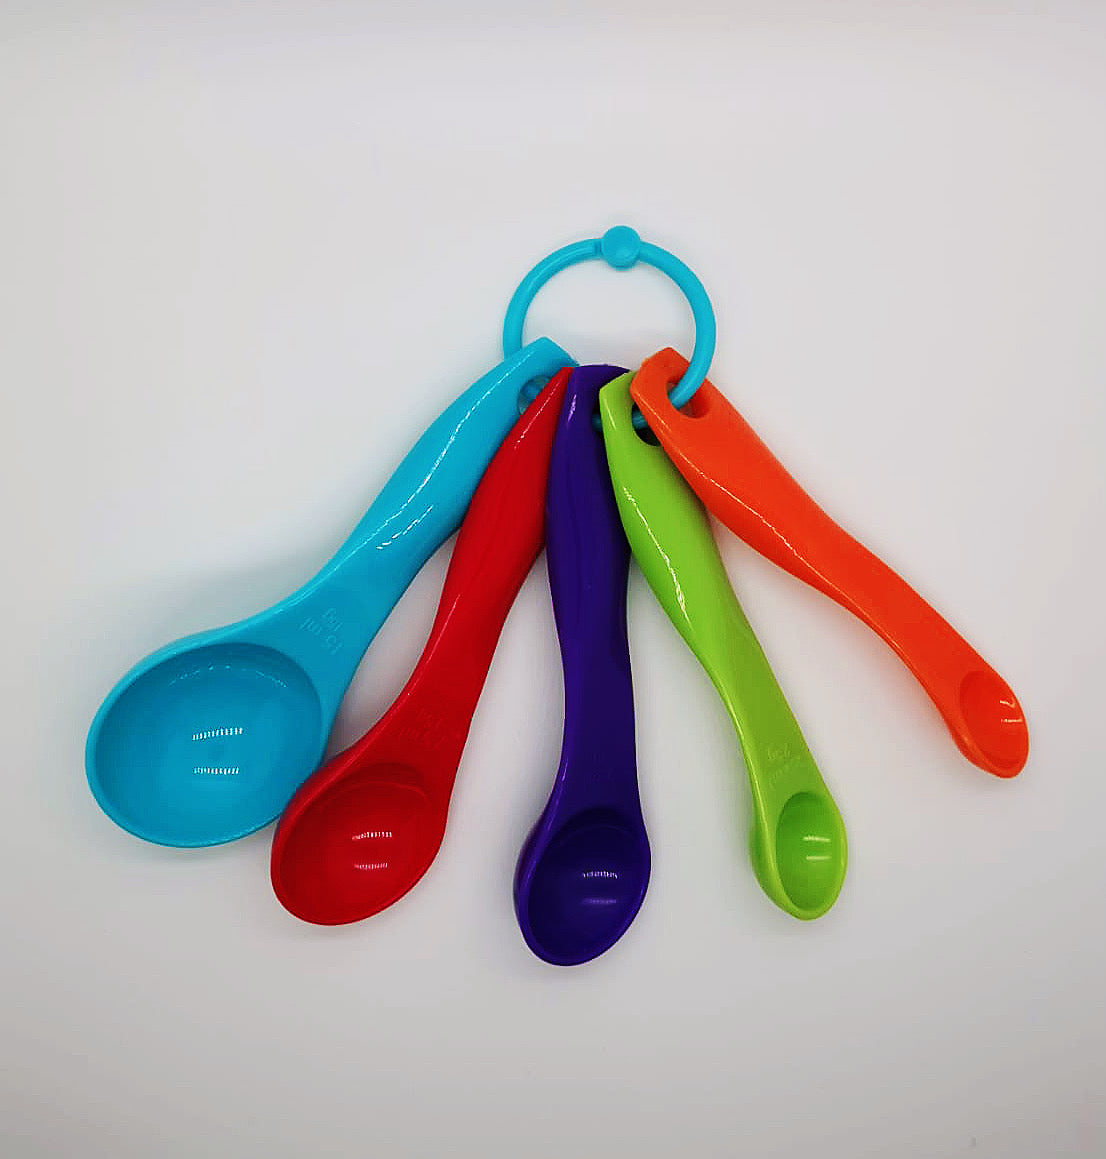 Colourful Measuring Spoon Set (5 packs) 彩色量勺 （五件) - Life Science Publishing & Products Hong Kong and Asia